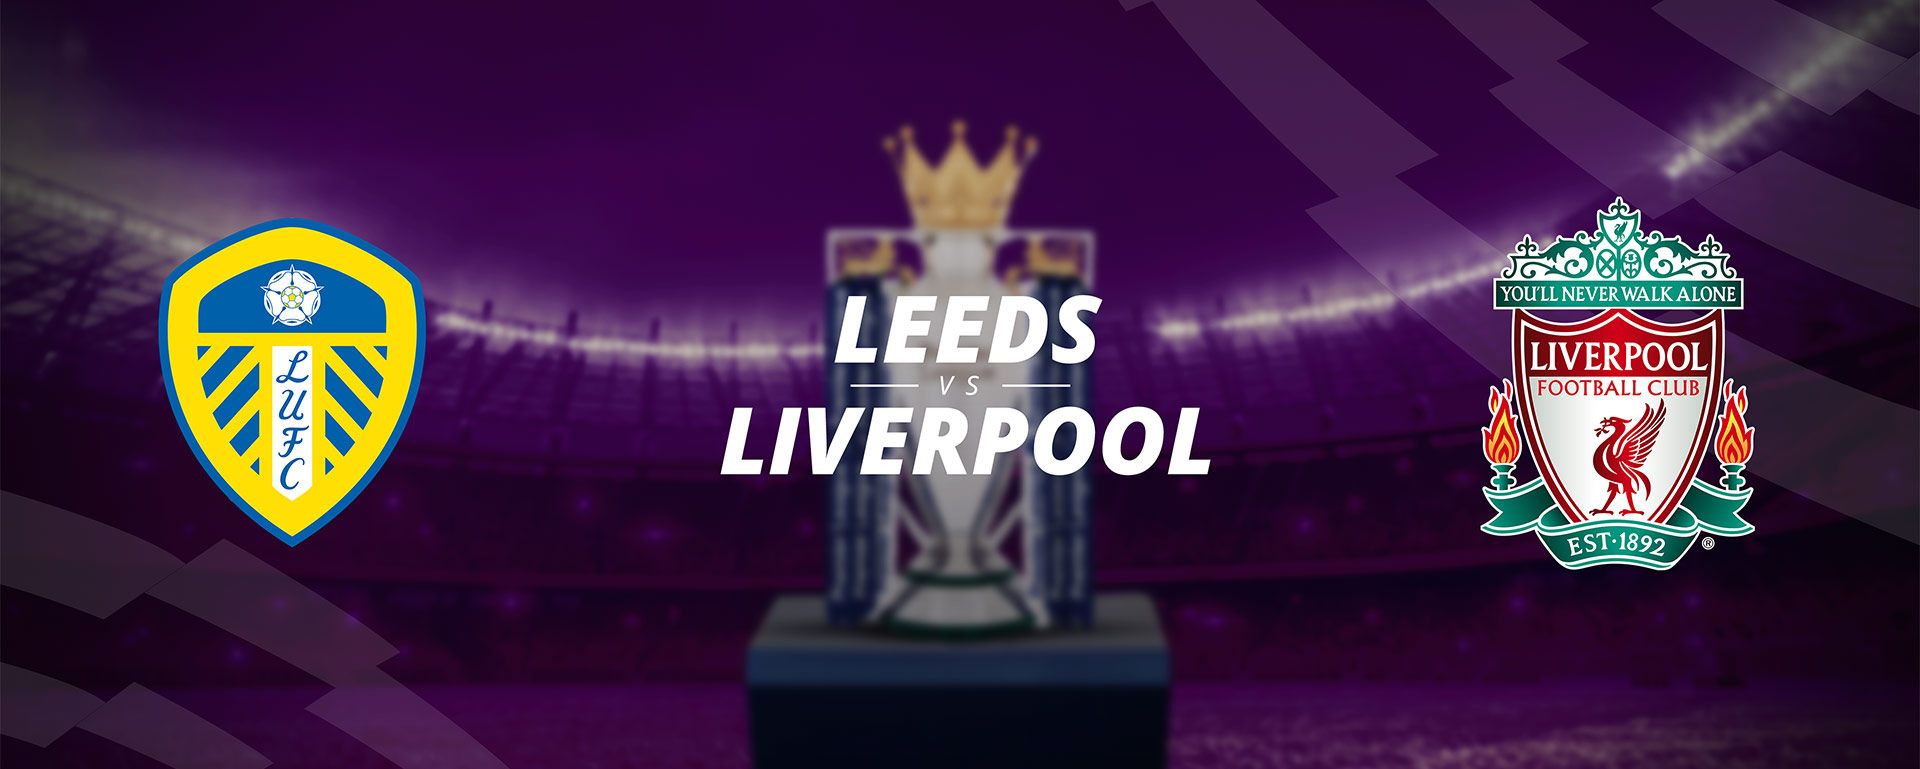 LEEDS VS LIVERPOOL: BETTING PREVIEW